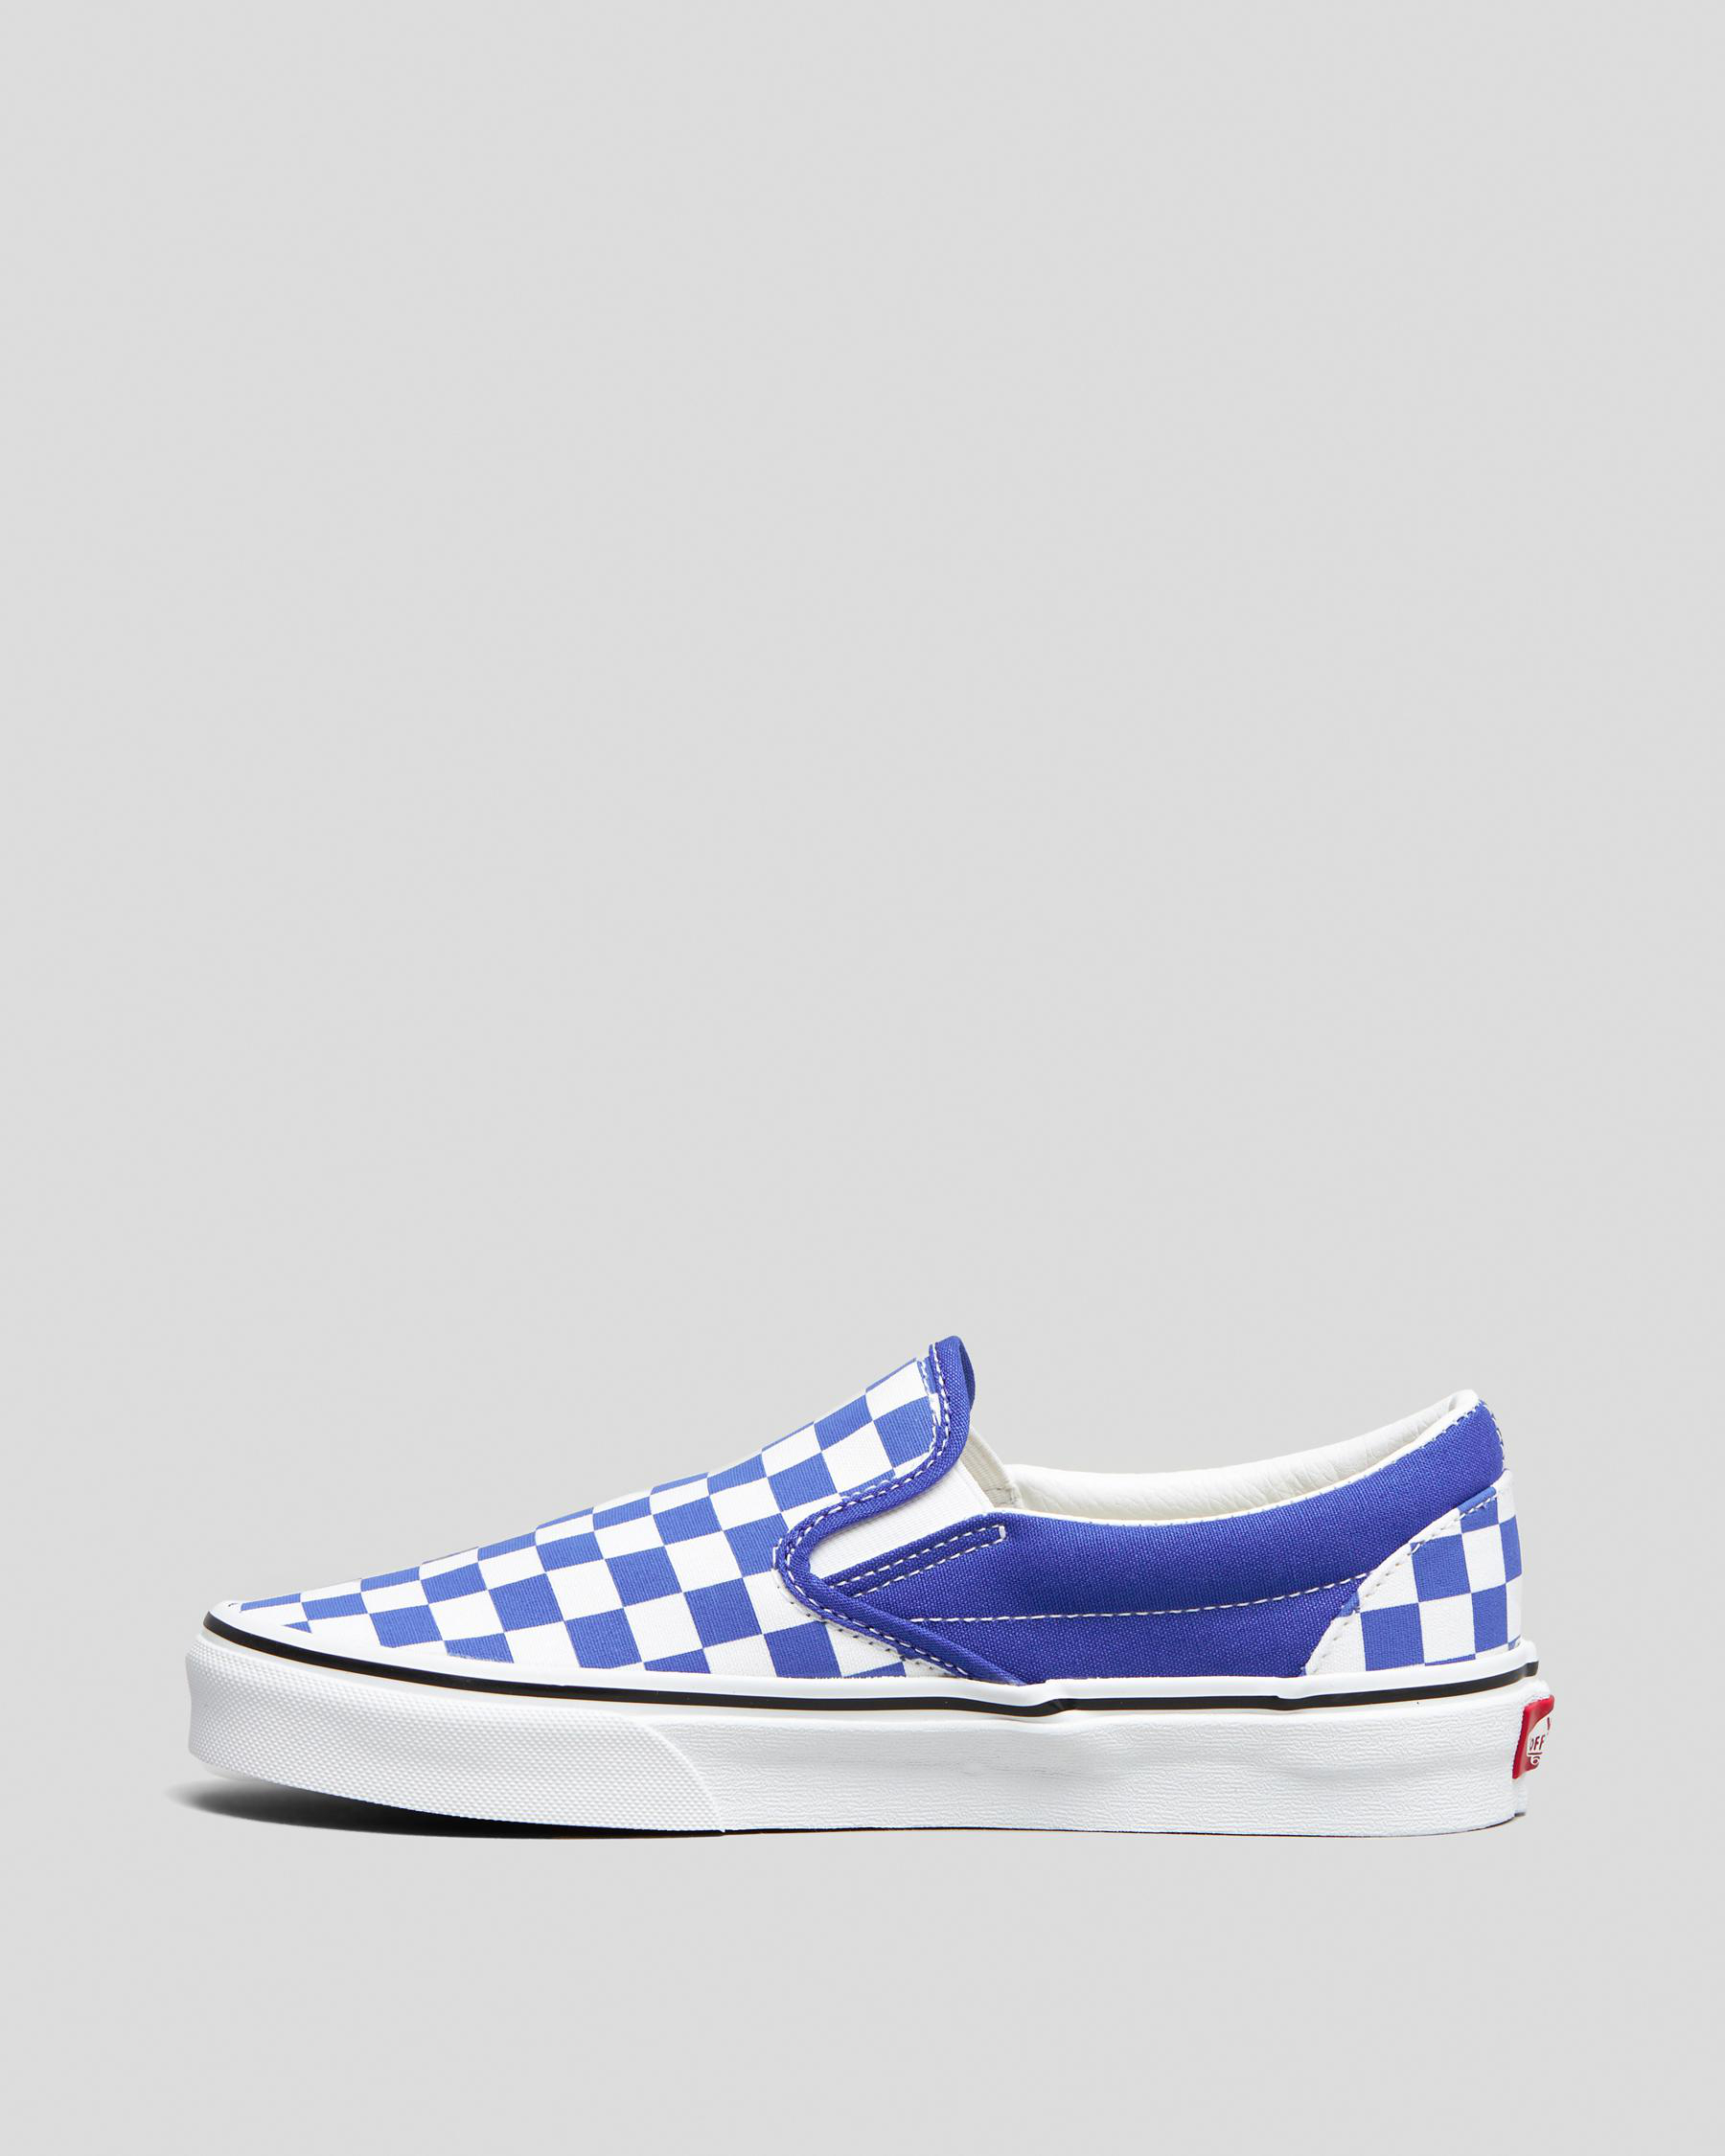 Shop Vans Womens Classic Slip On Shoes In Dazzling Blue - Fast Shipping ...